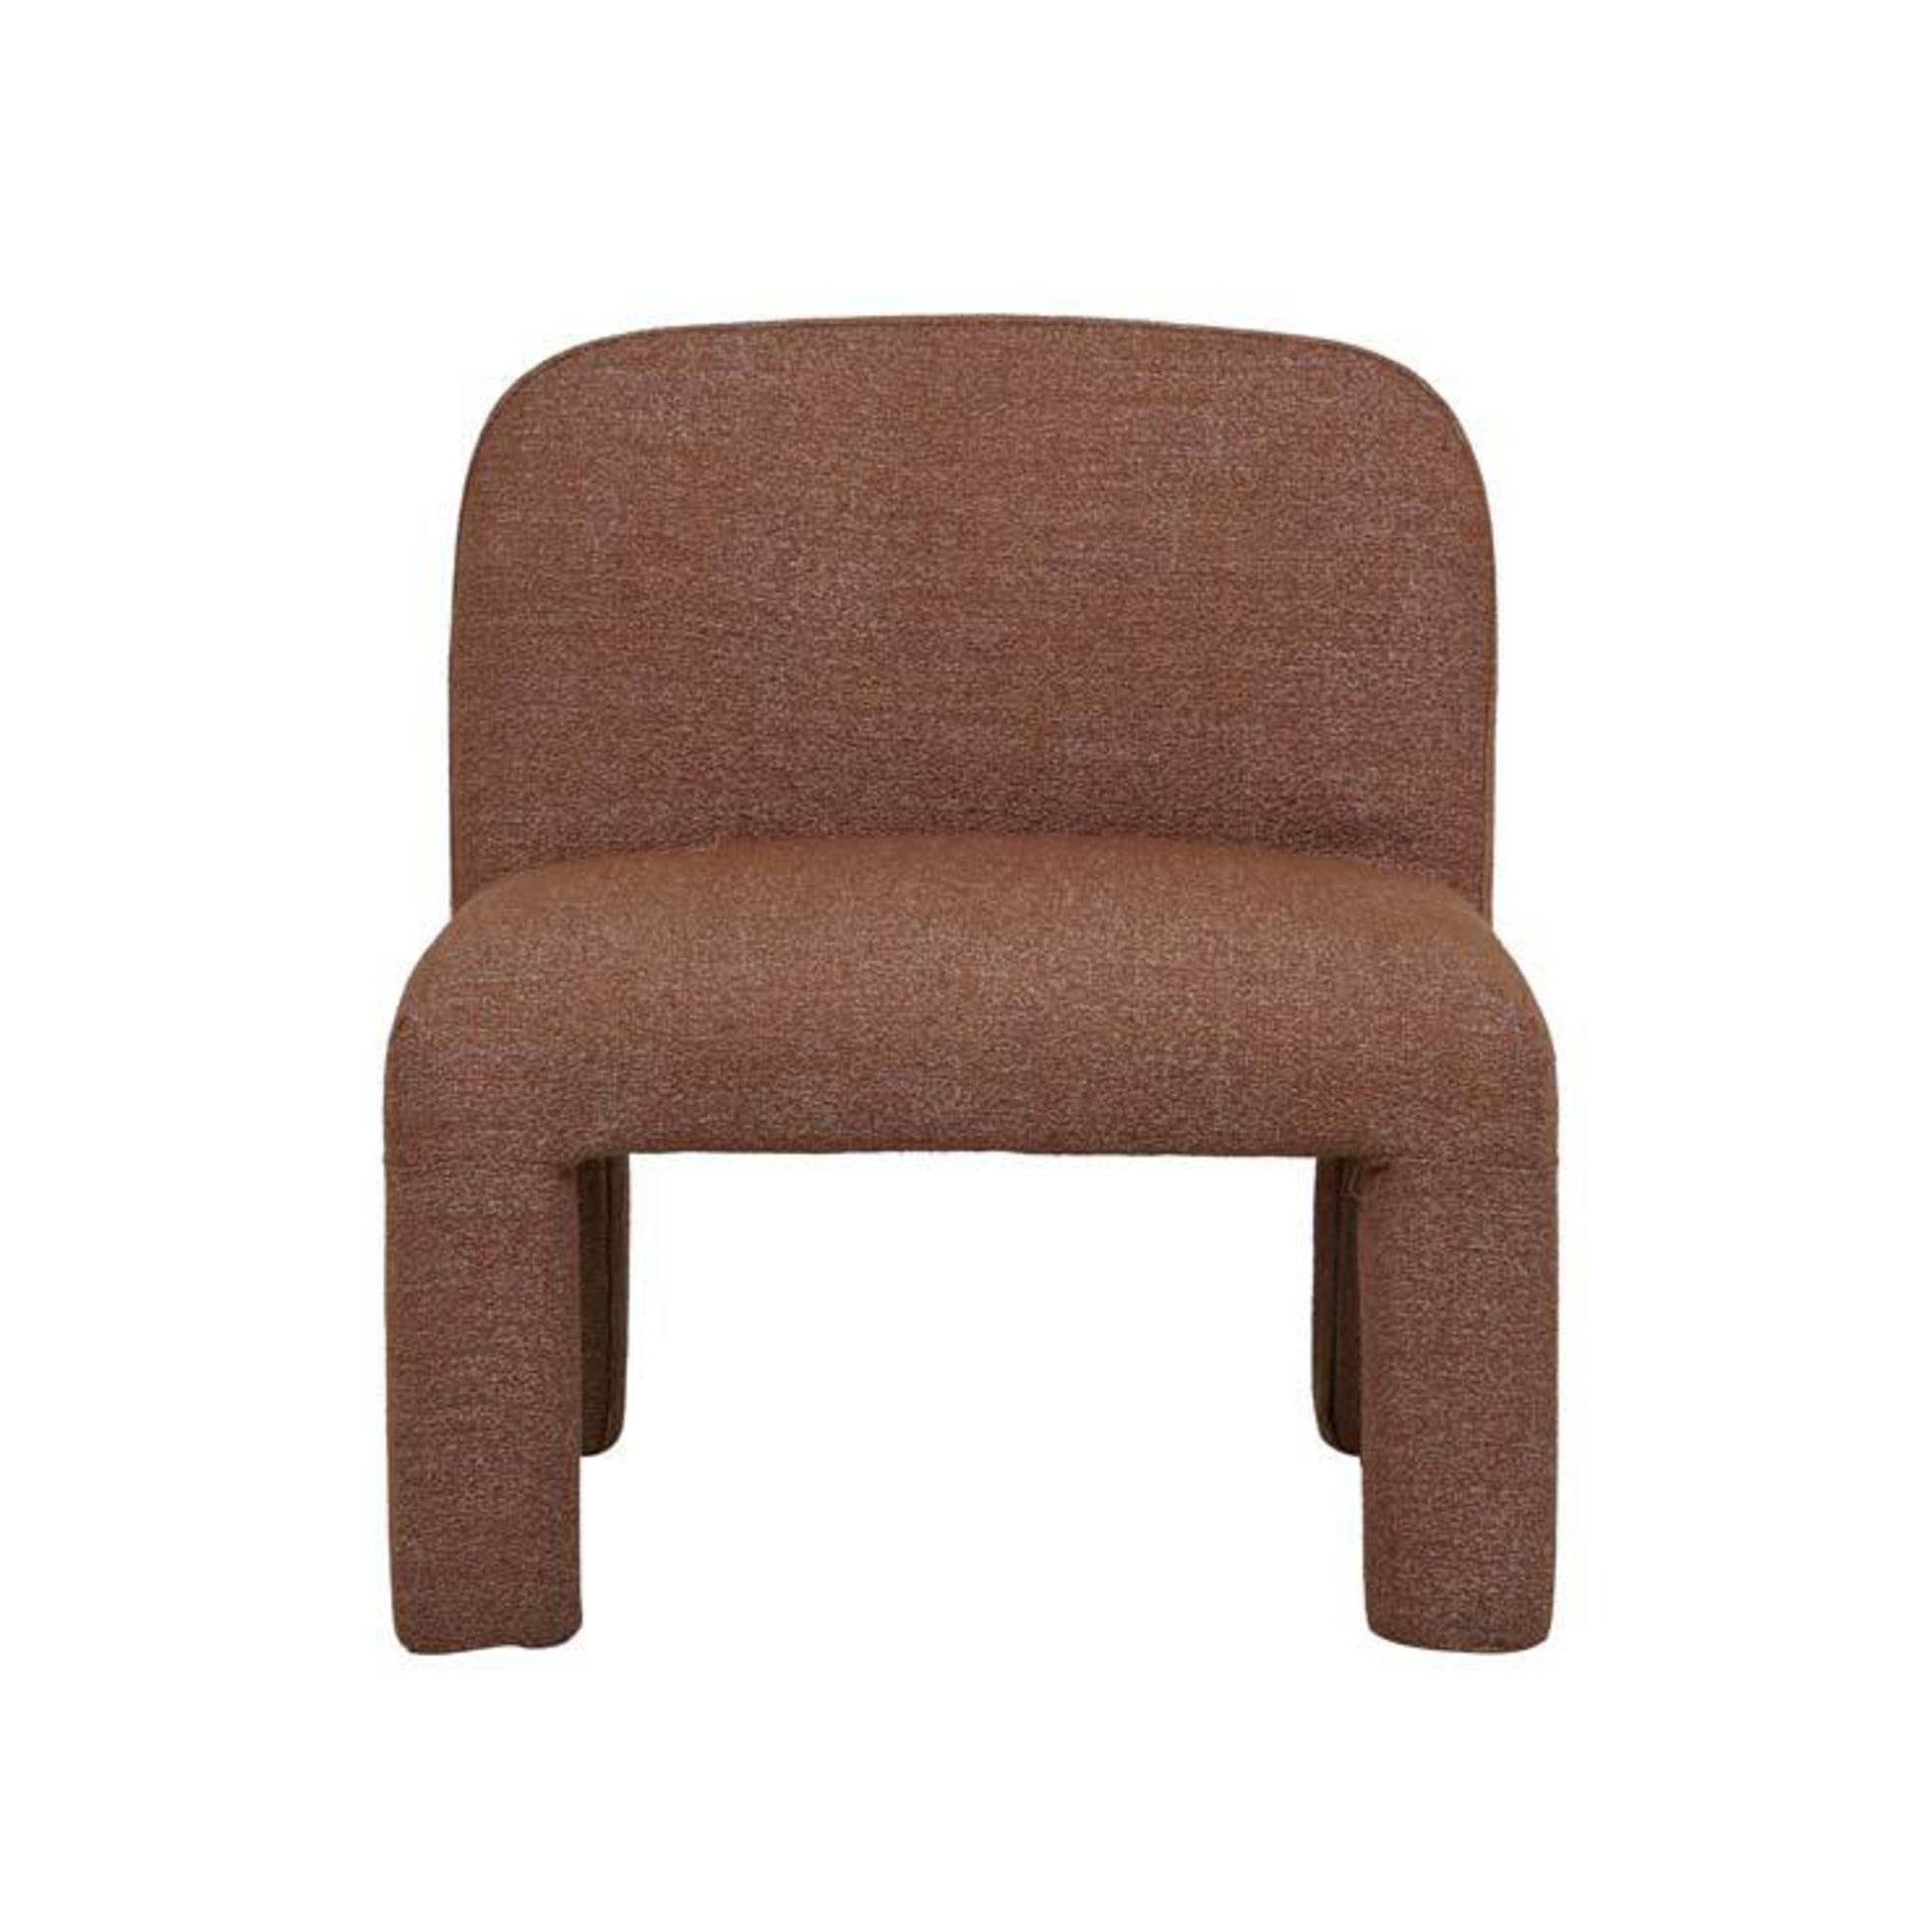 Hugo Arc occasional chair in rust